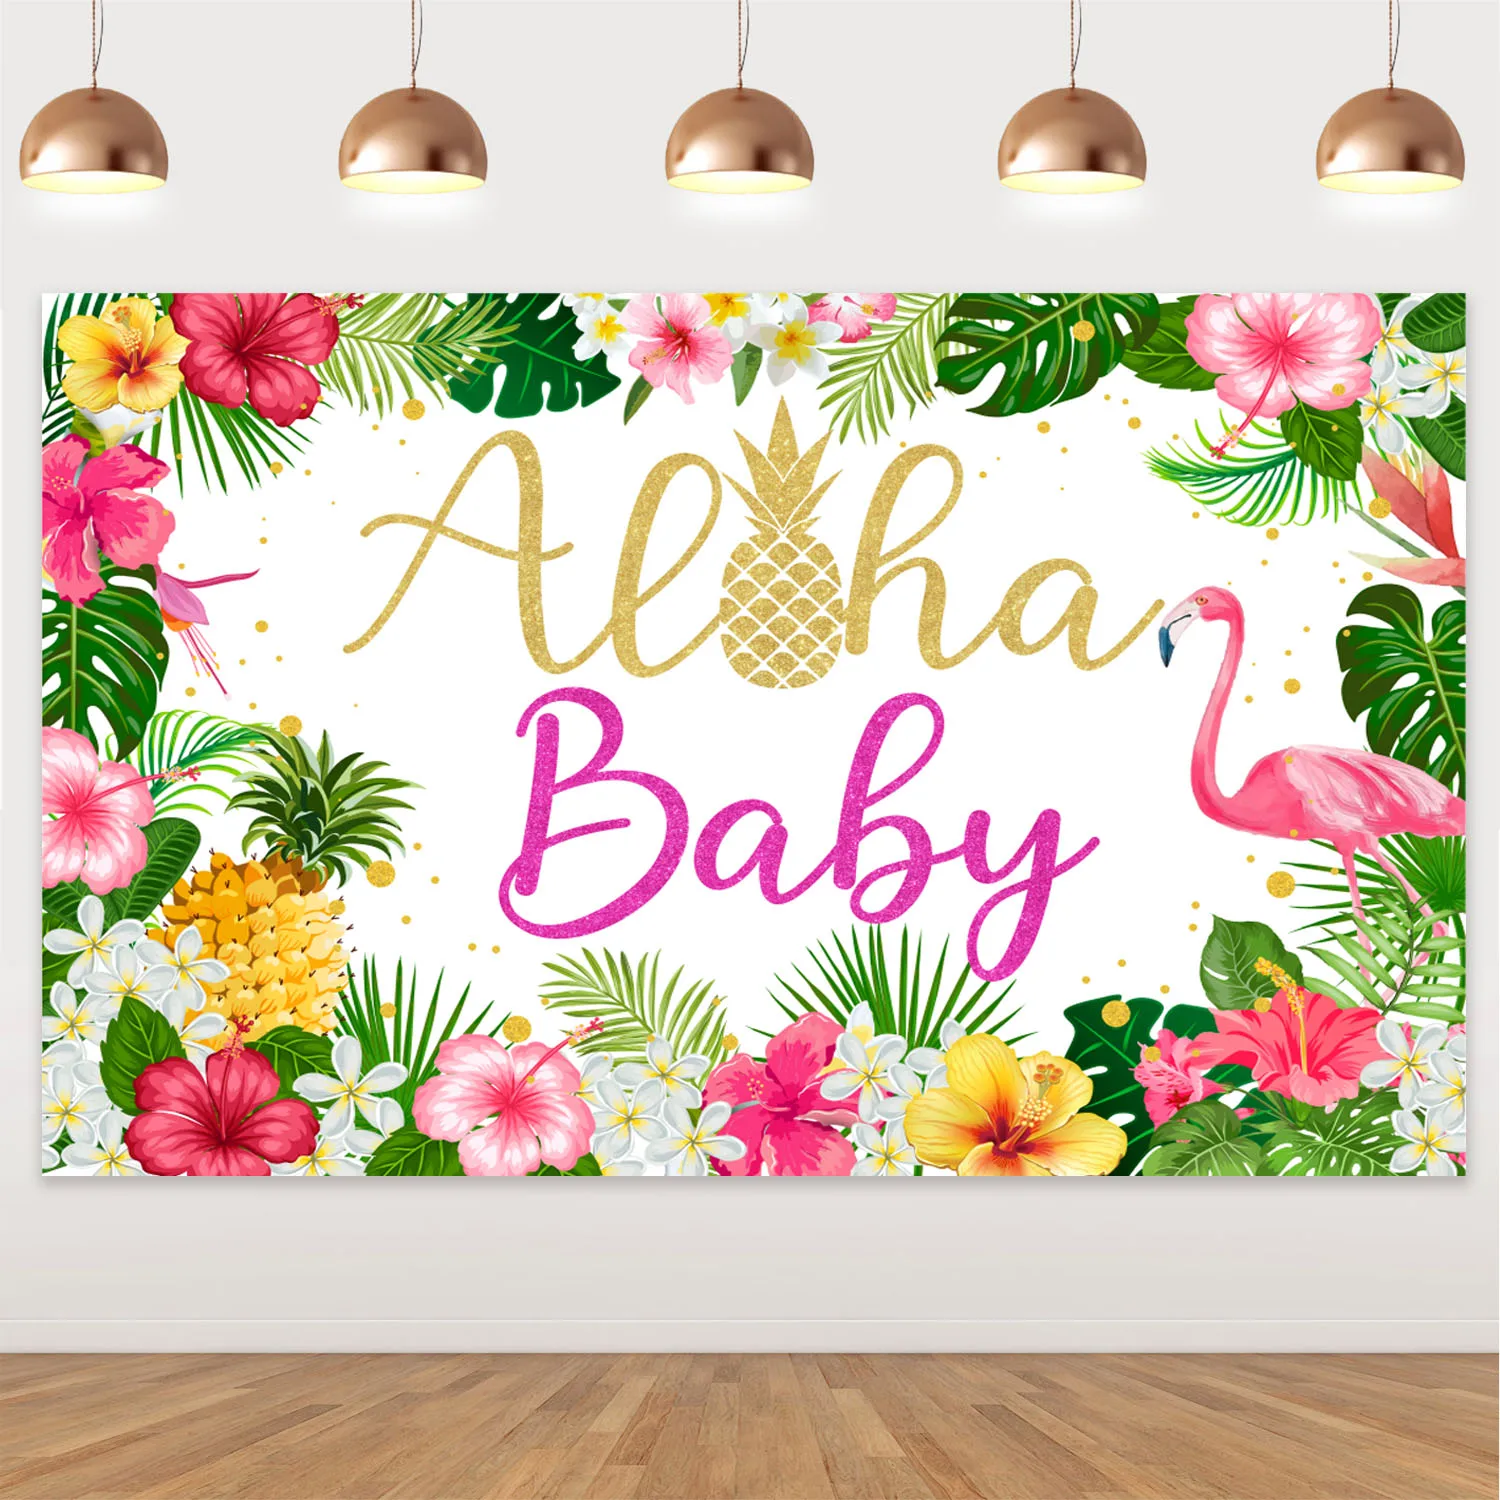 

Aloha Baby Backdrop Luau Hawaiian Party Decorations Tropical Beach Baby Shower Floral Pineapple Photo Photography Background